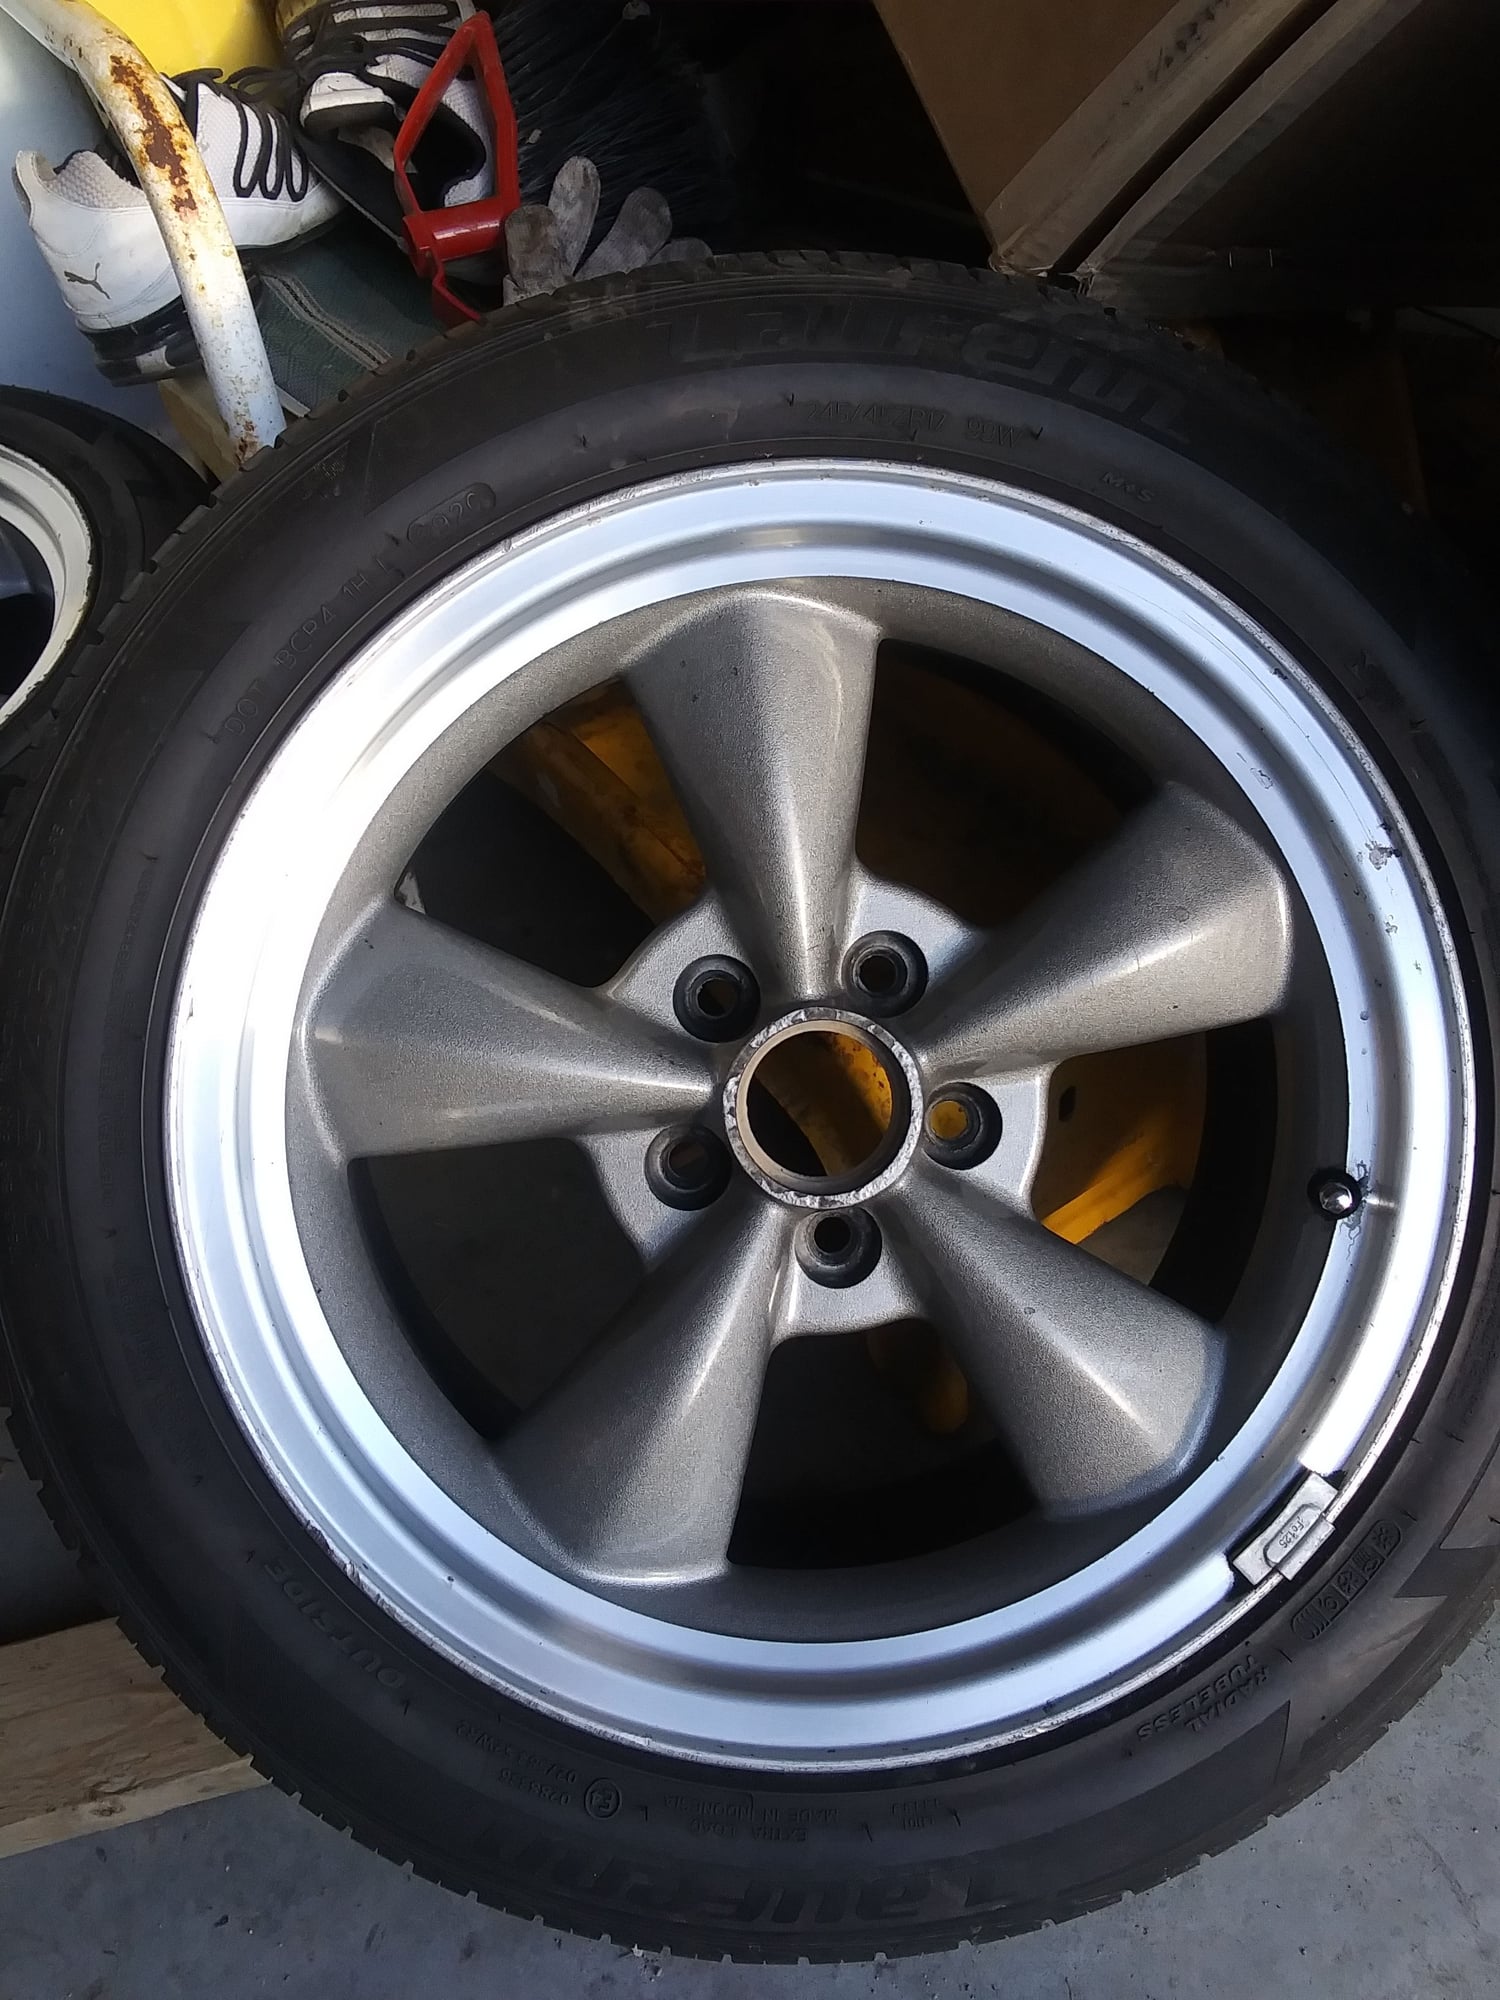 Wheels and Tires/Axles - 99-04 5lug wheels and tires - Used - 1999 to 2004 Ford Mustang - Brookville, IN 47012, United States